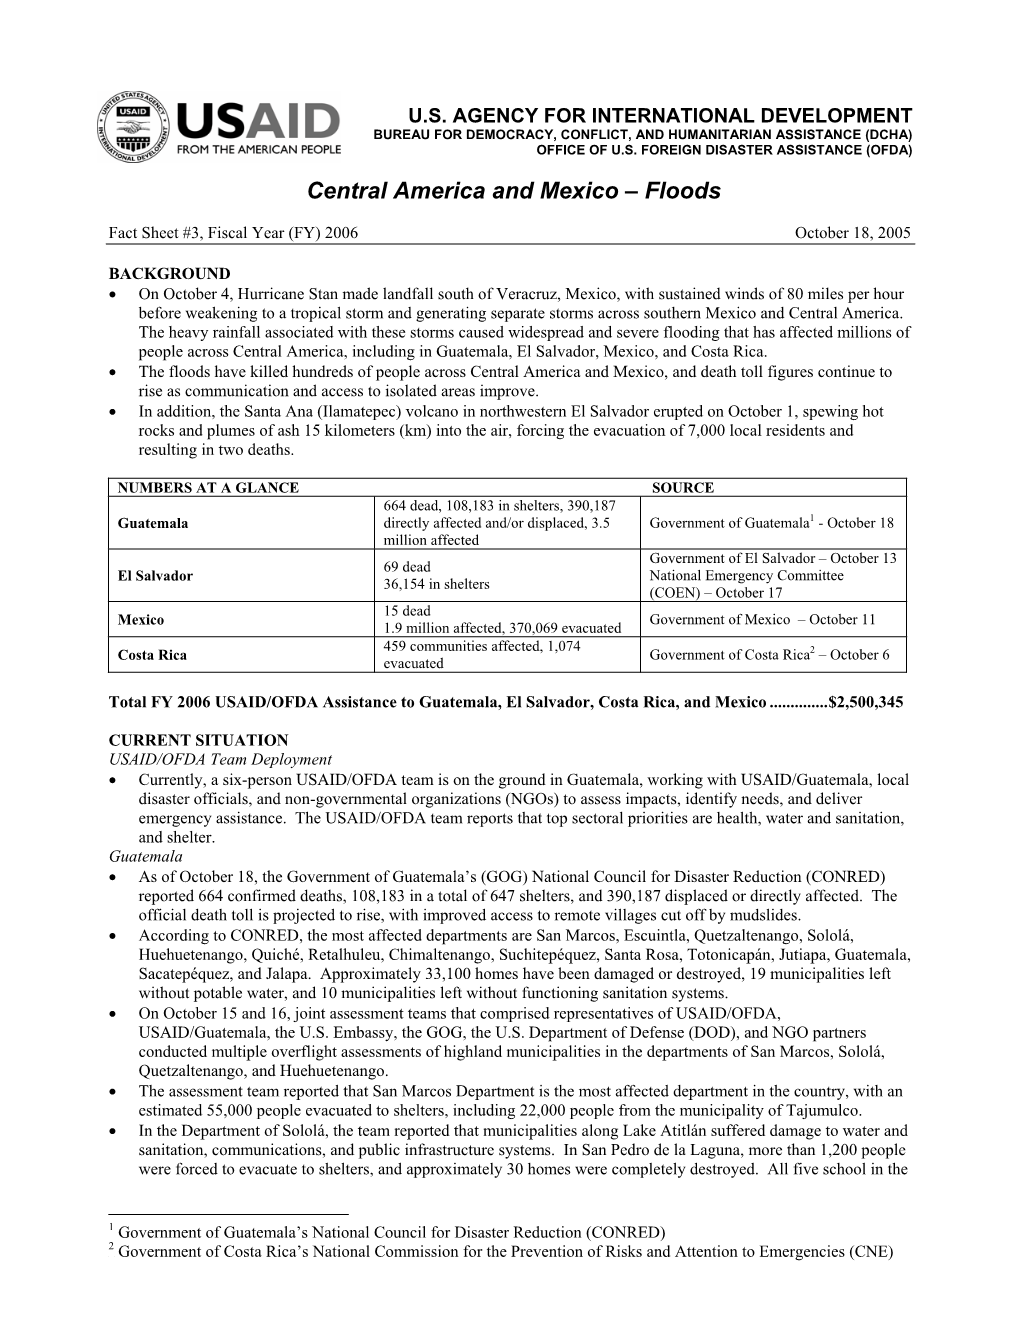 USAID Fact Sheet #3 Central America and Mexico Floods 10/18/05